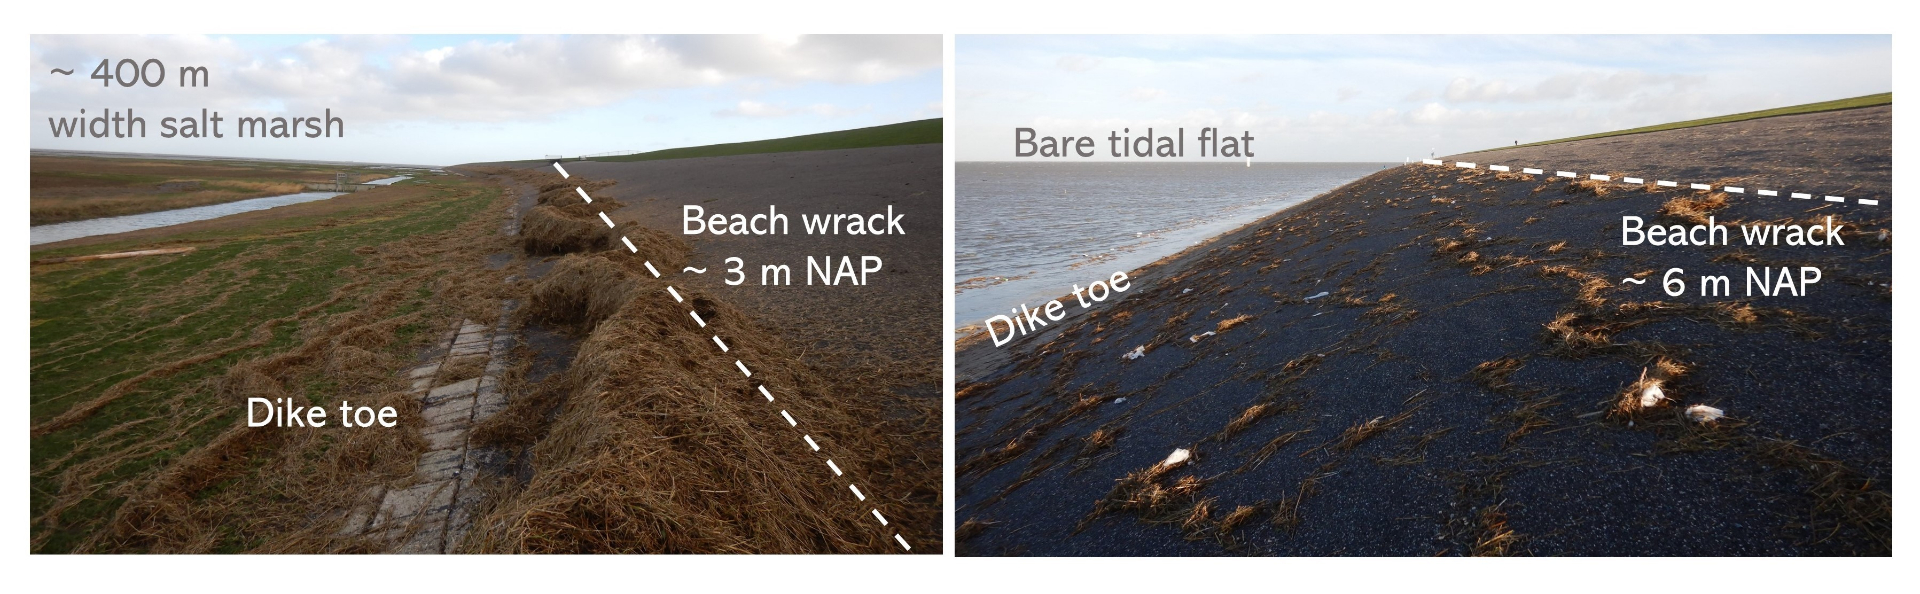 The importance of salt marshes for the coastal defence is illustrated by the height of waves during a storm. Afterwards beach-wreck shows the height that waves reached on a dike. Photos: Bea Marin-Diaz.